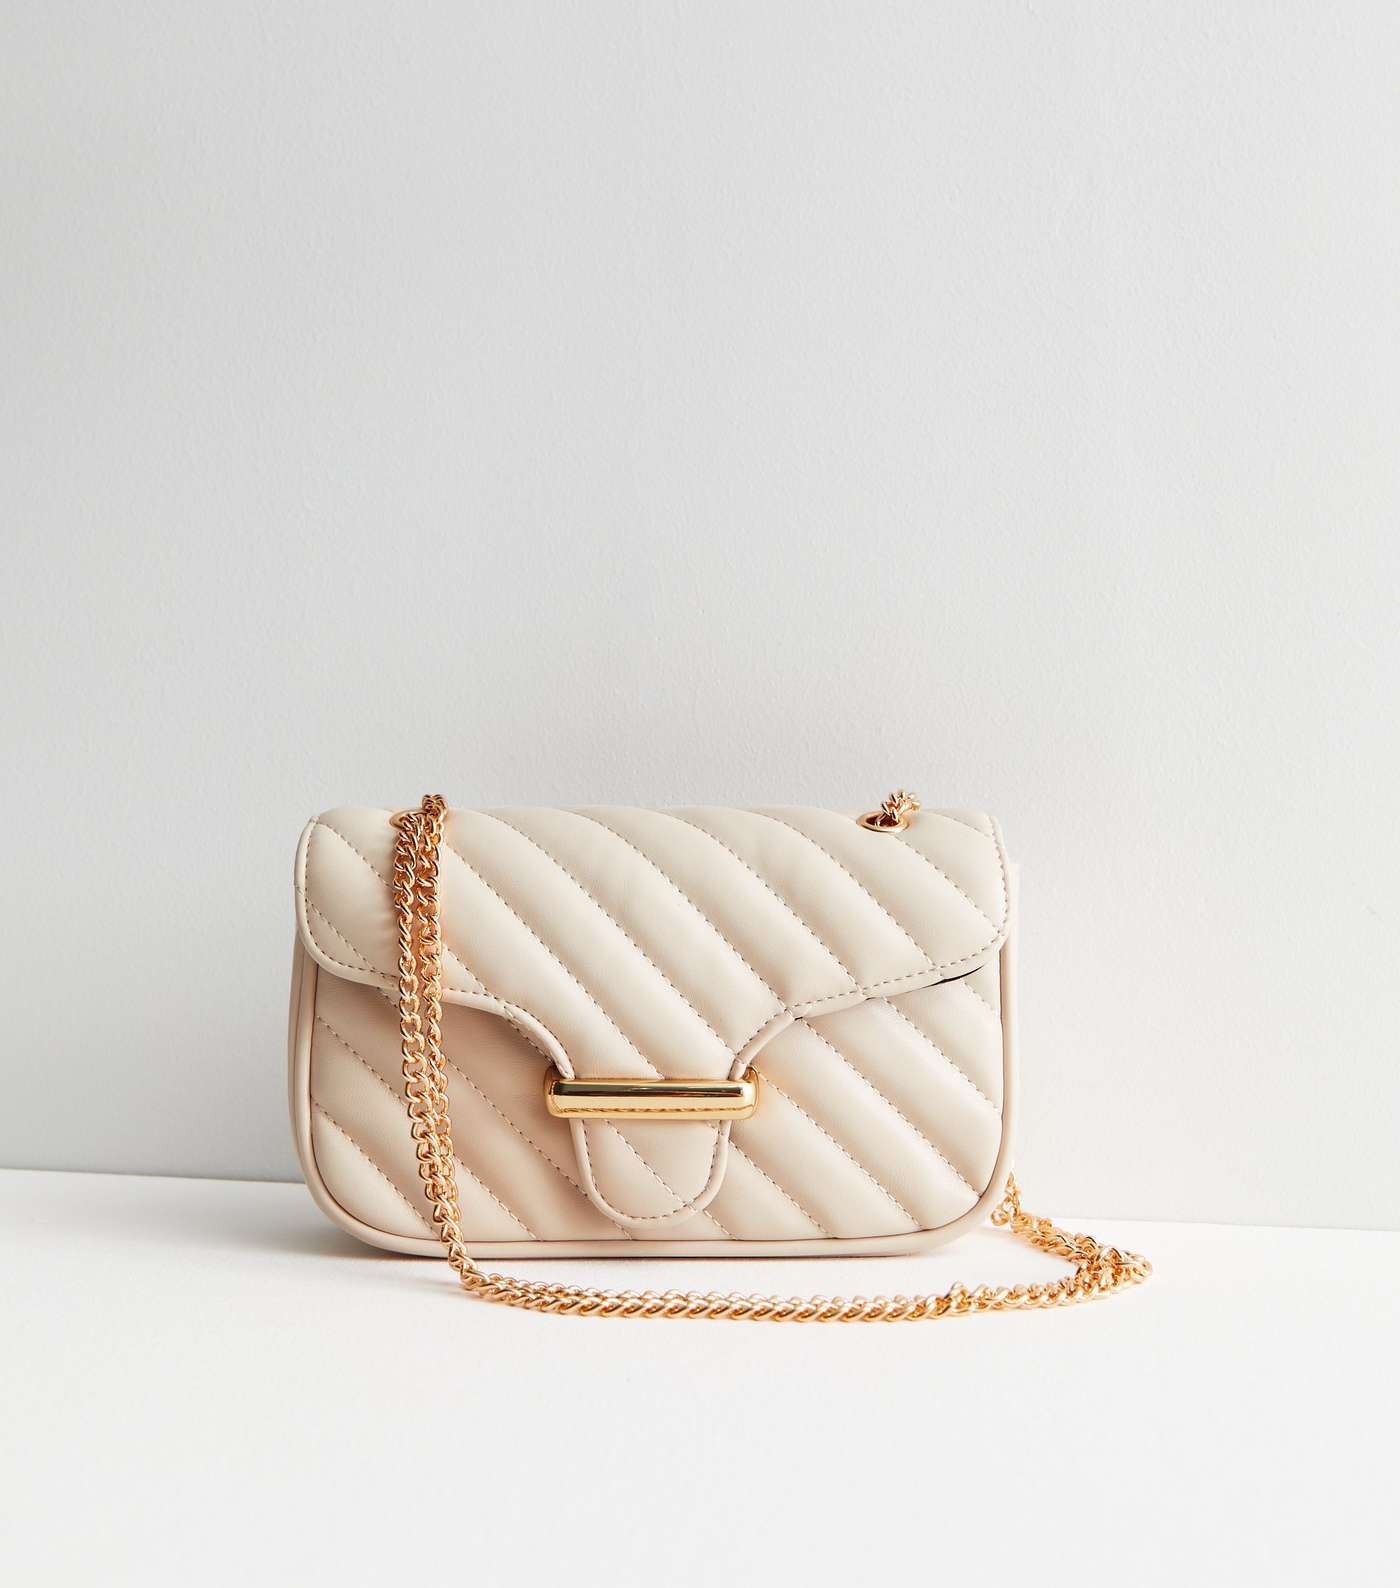 Cream Leather-Look Quilted Chain Strap Shoulder Bag Image 3